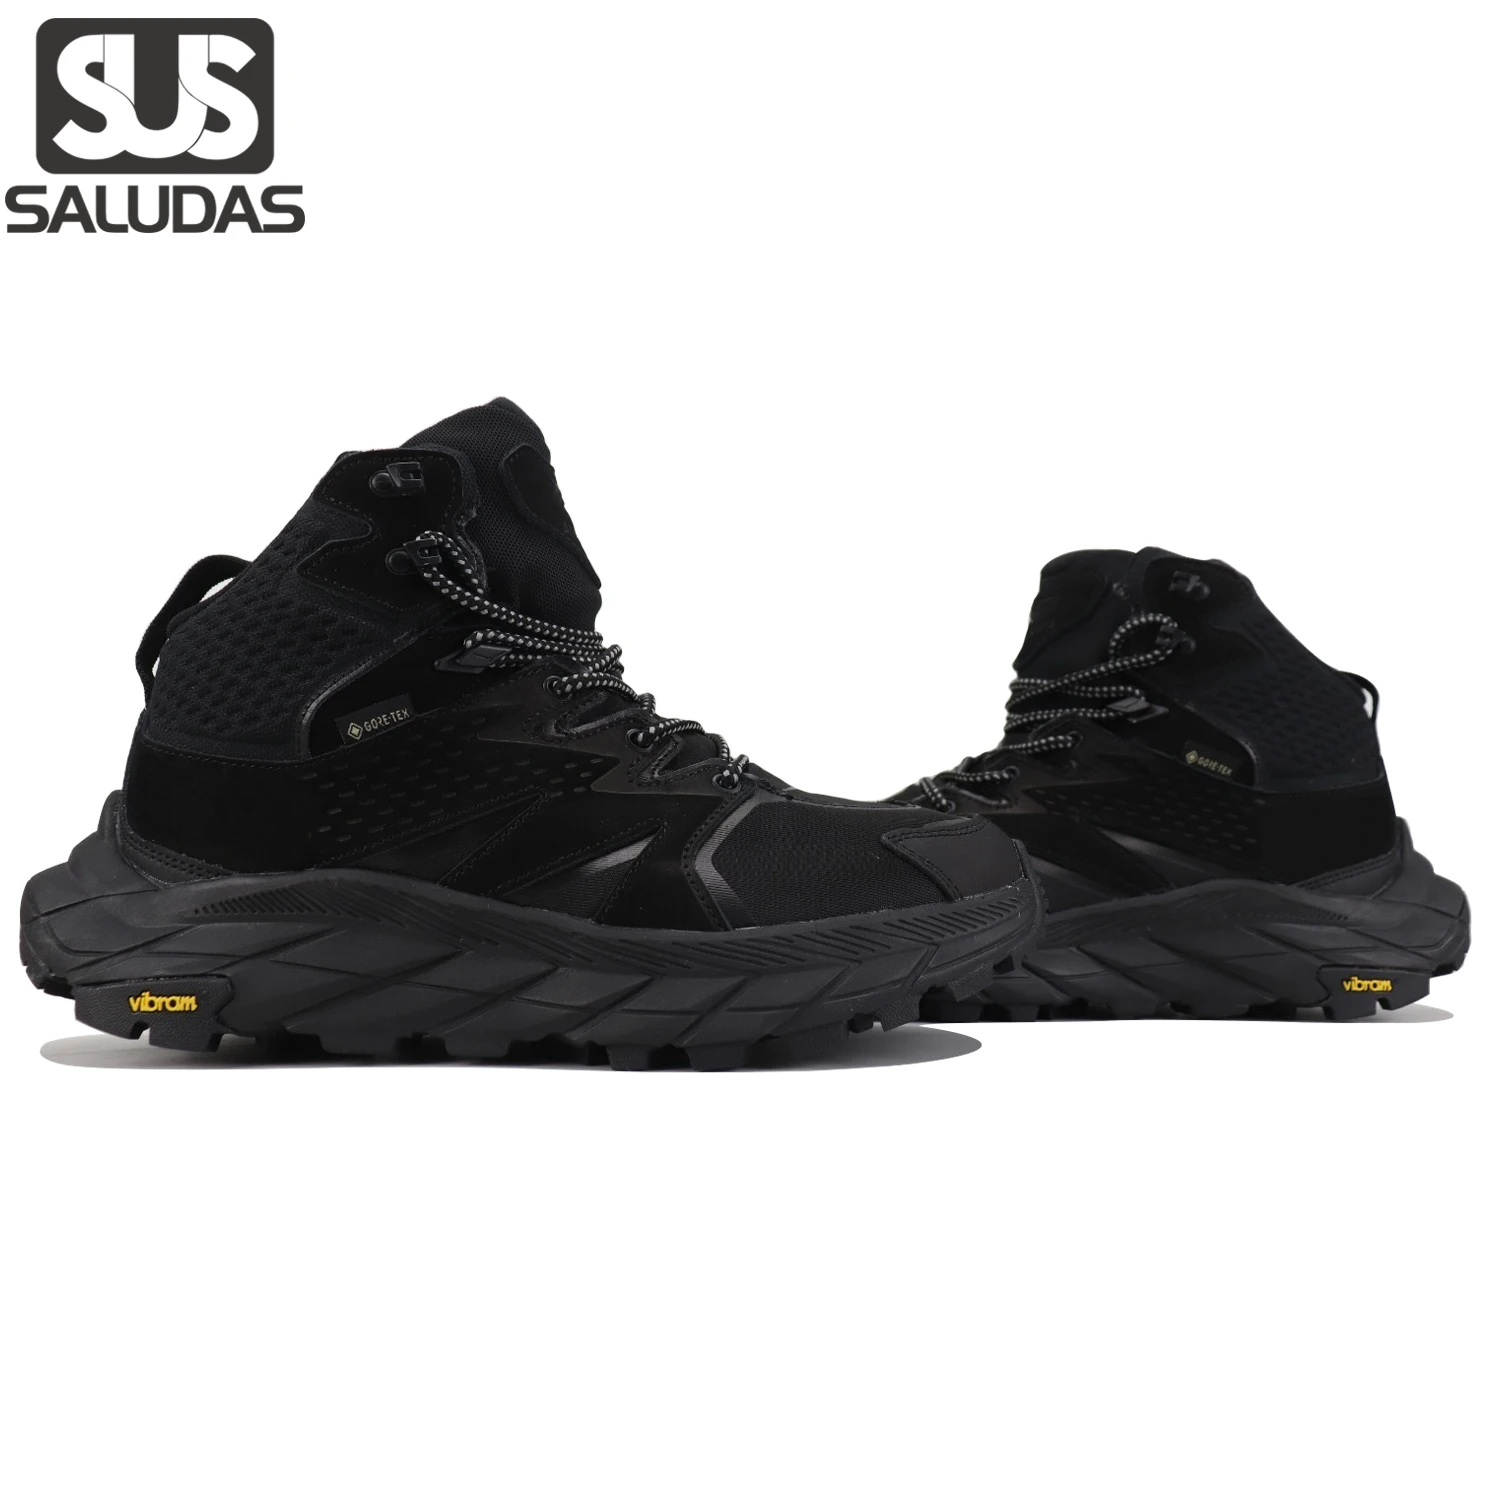 

SALUDAS Anacapa Mid GTX Waterproof Men Hiking Shoes Outdoor Non-slip Camping Trekking Shoes High Top Climbing Boots for Male